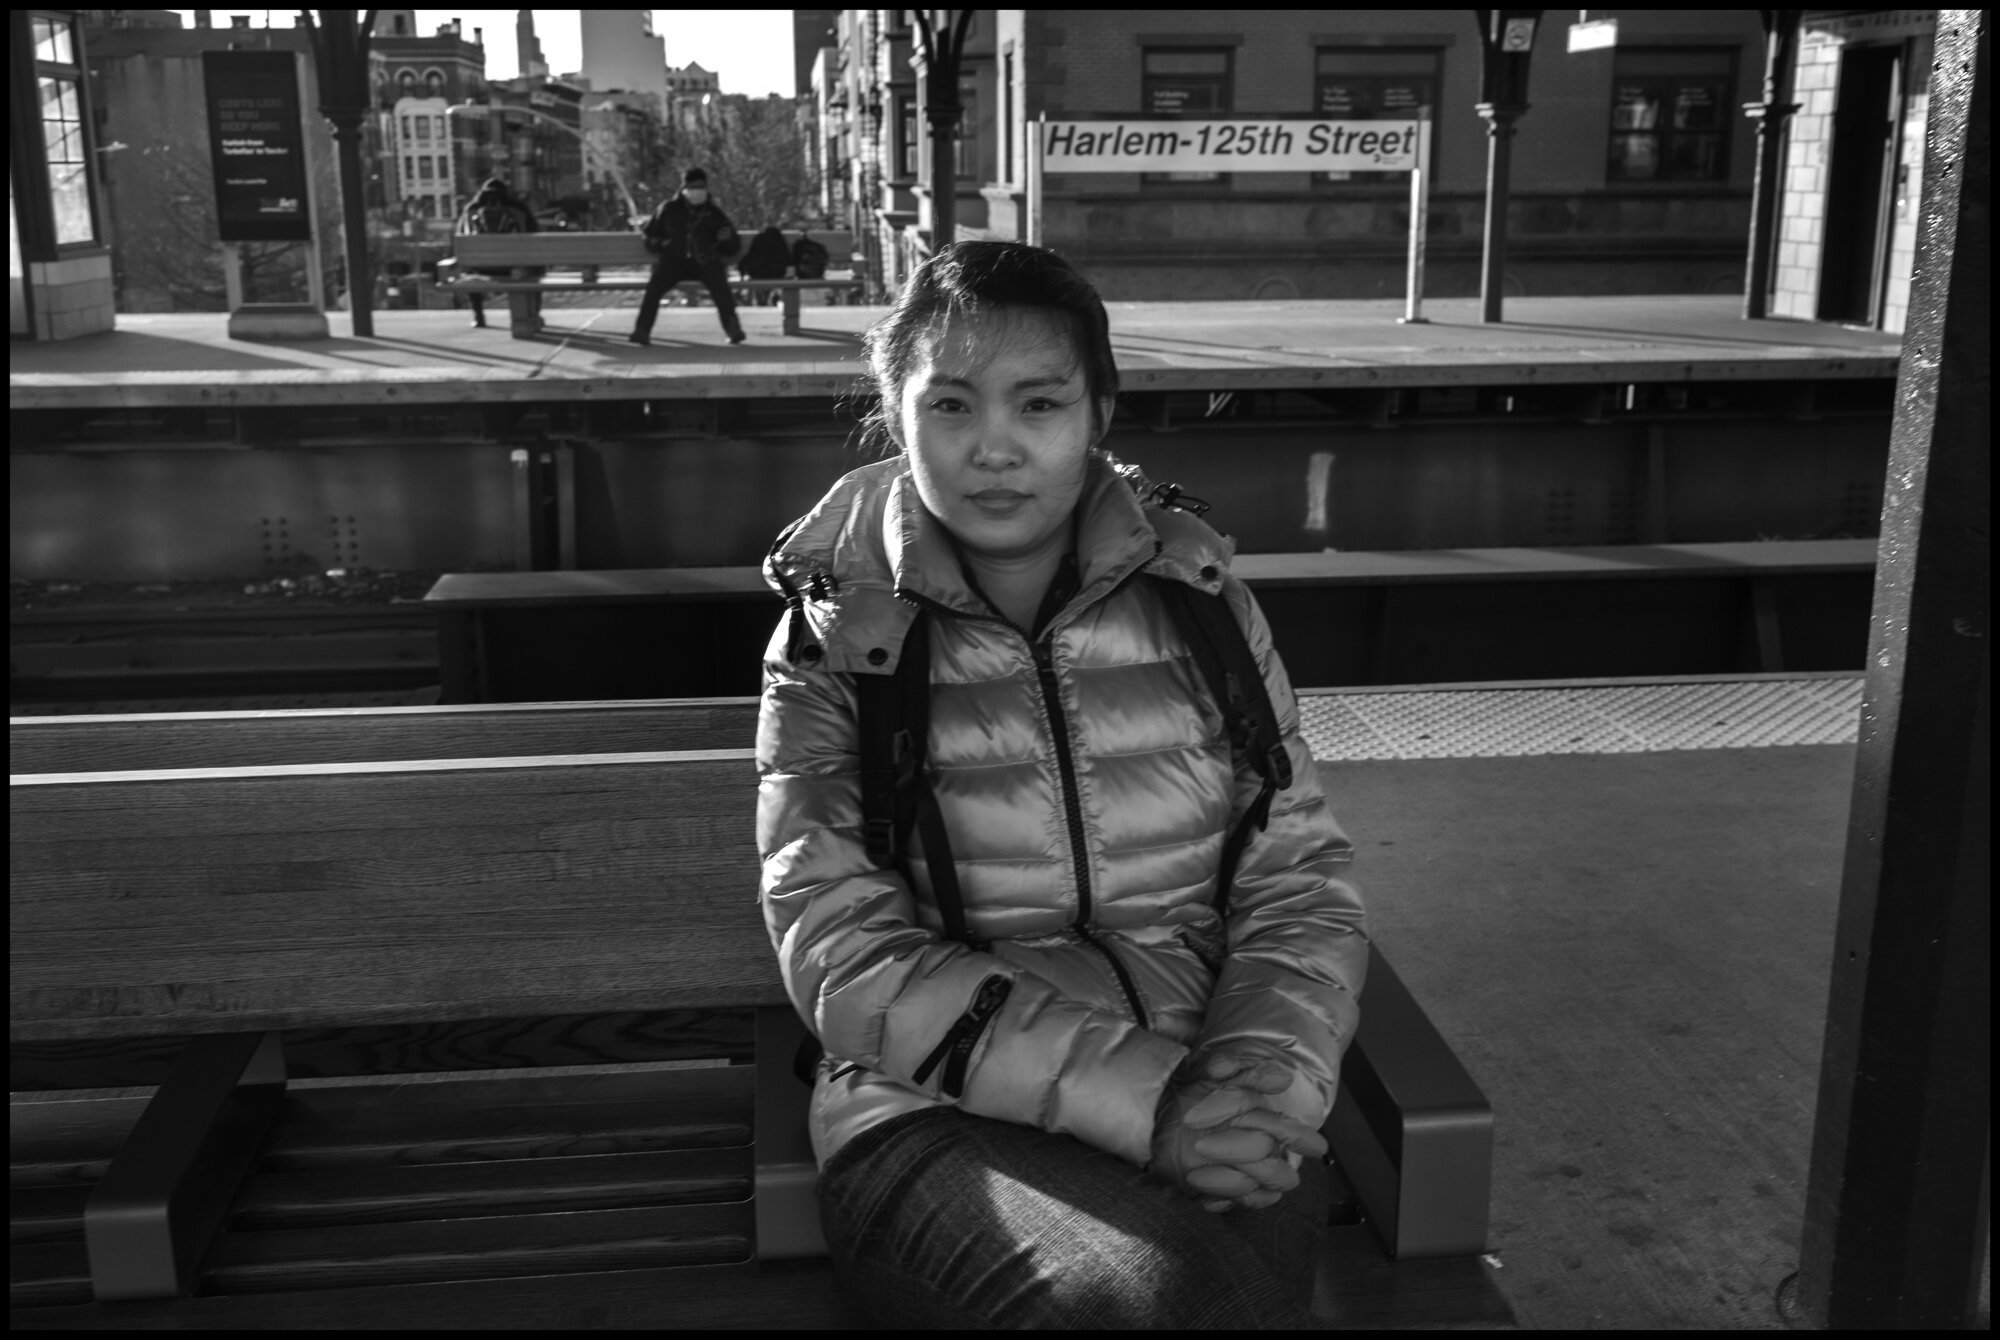  A medical student, Haymar, 29, from Myanmar, waits for a train to go home at the 125th street train stop in Harlem. She works at a medical clinic in Harlem.  March 24, 2020. © Peter Turnley.  ID# 03-013 